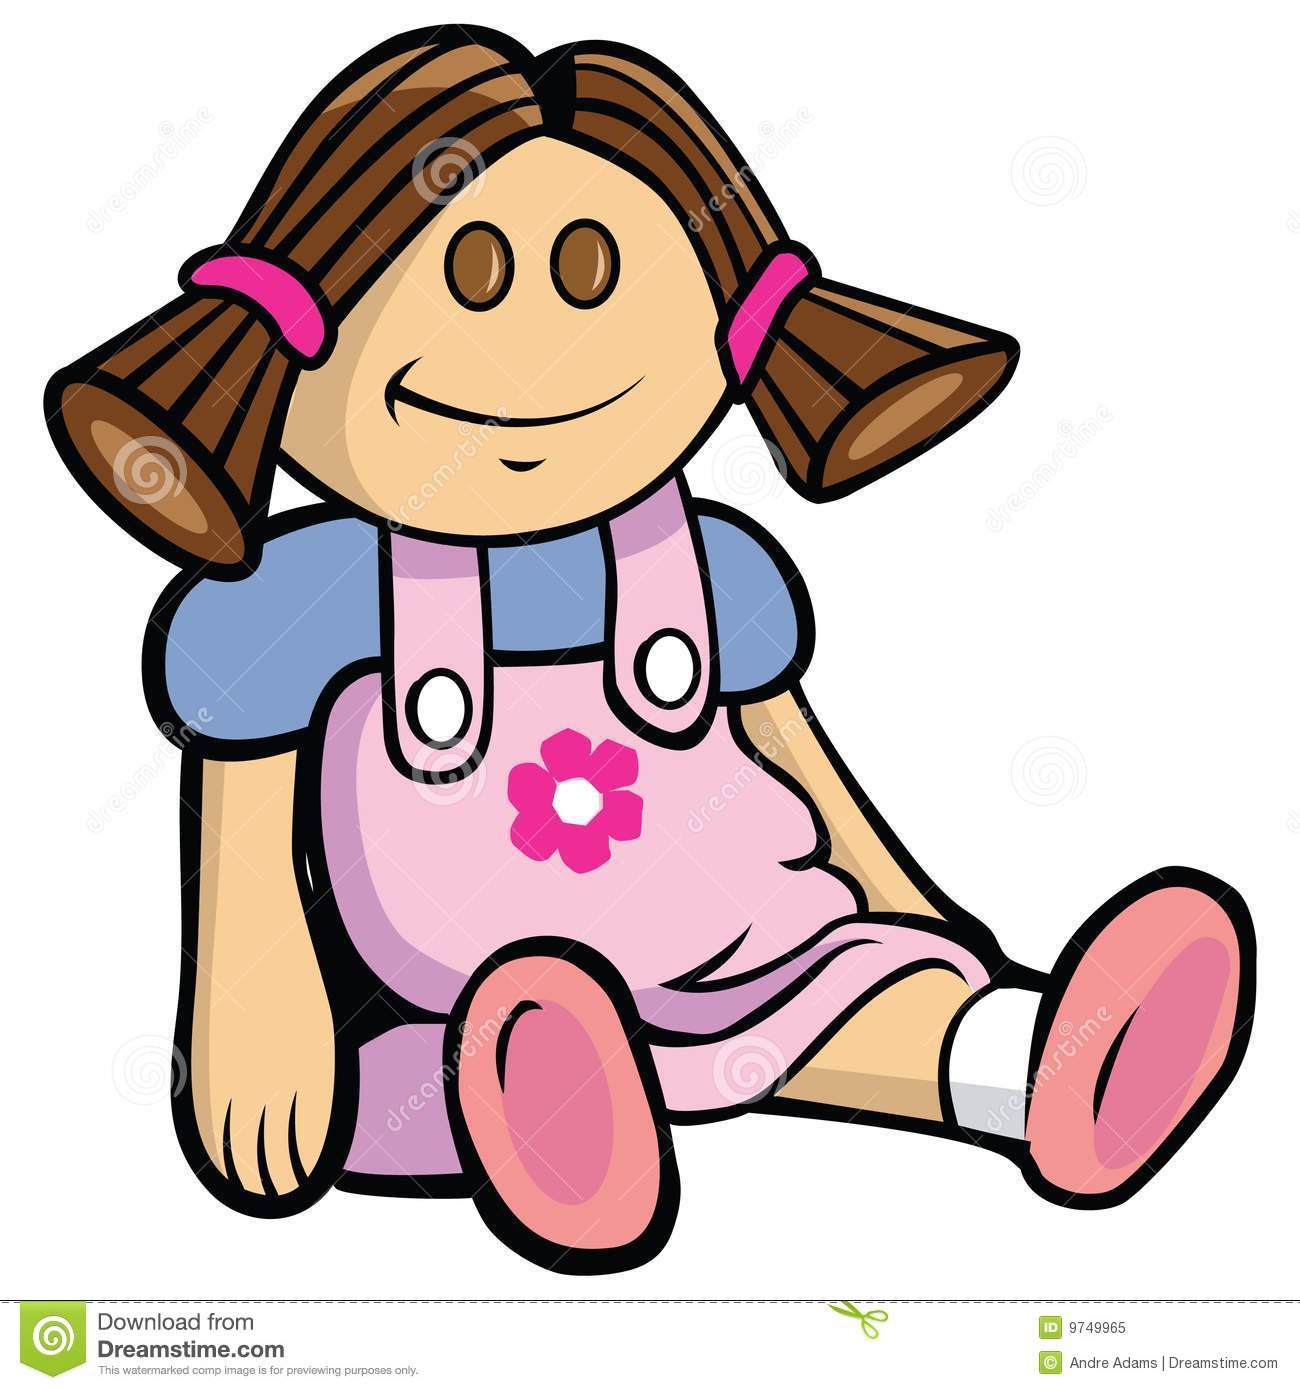 clipart of a doll - photo #16